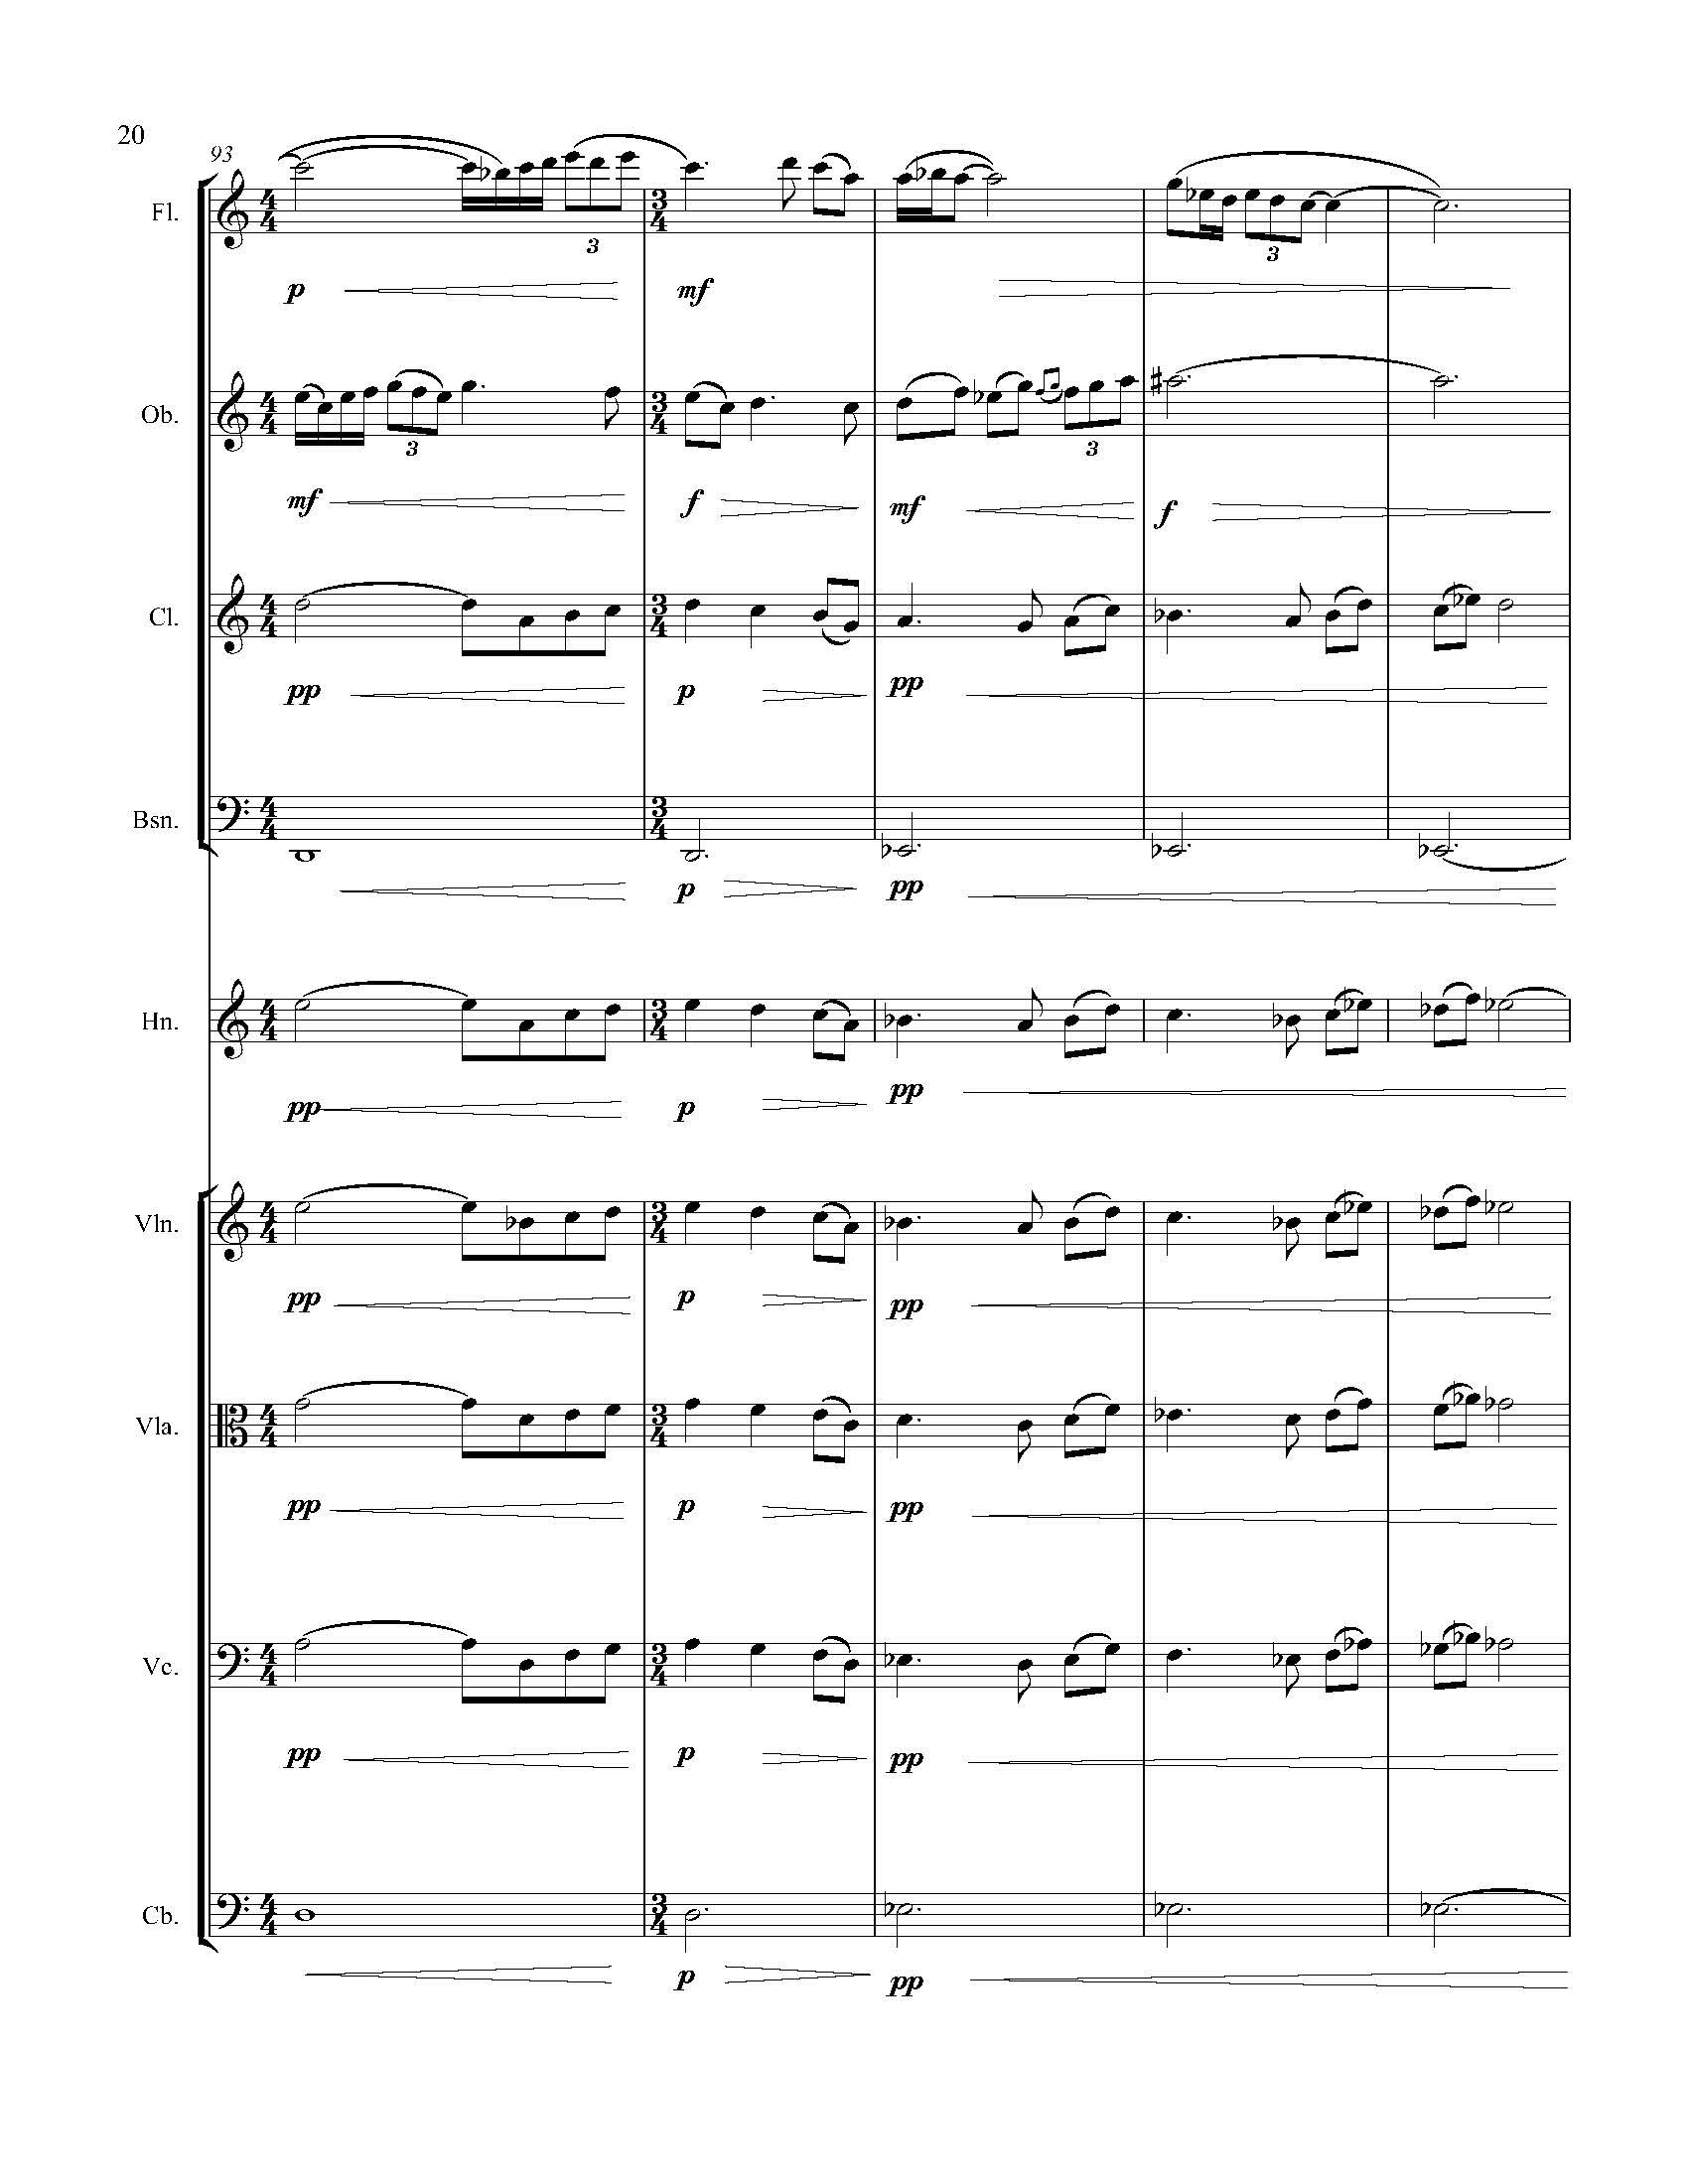 In Search of a Bird - Complete Score_Page_26.jpg